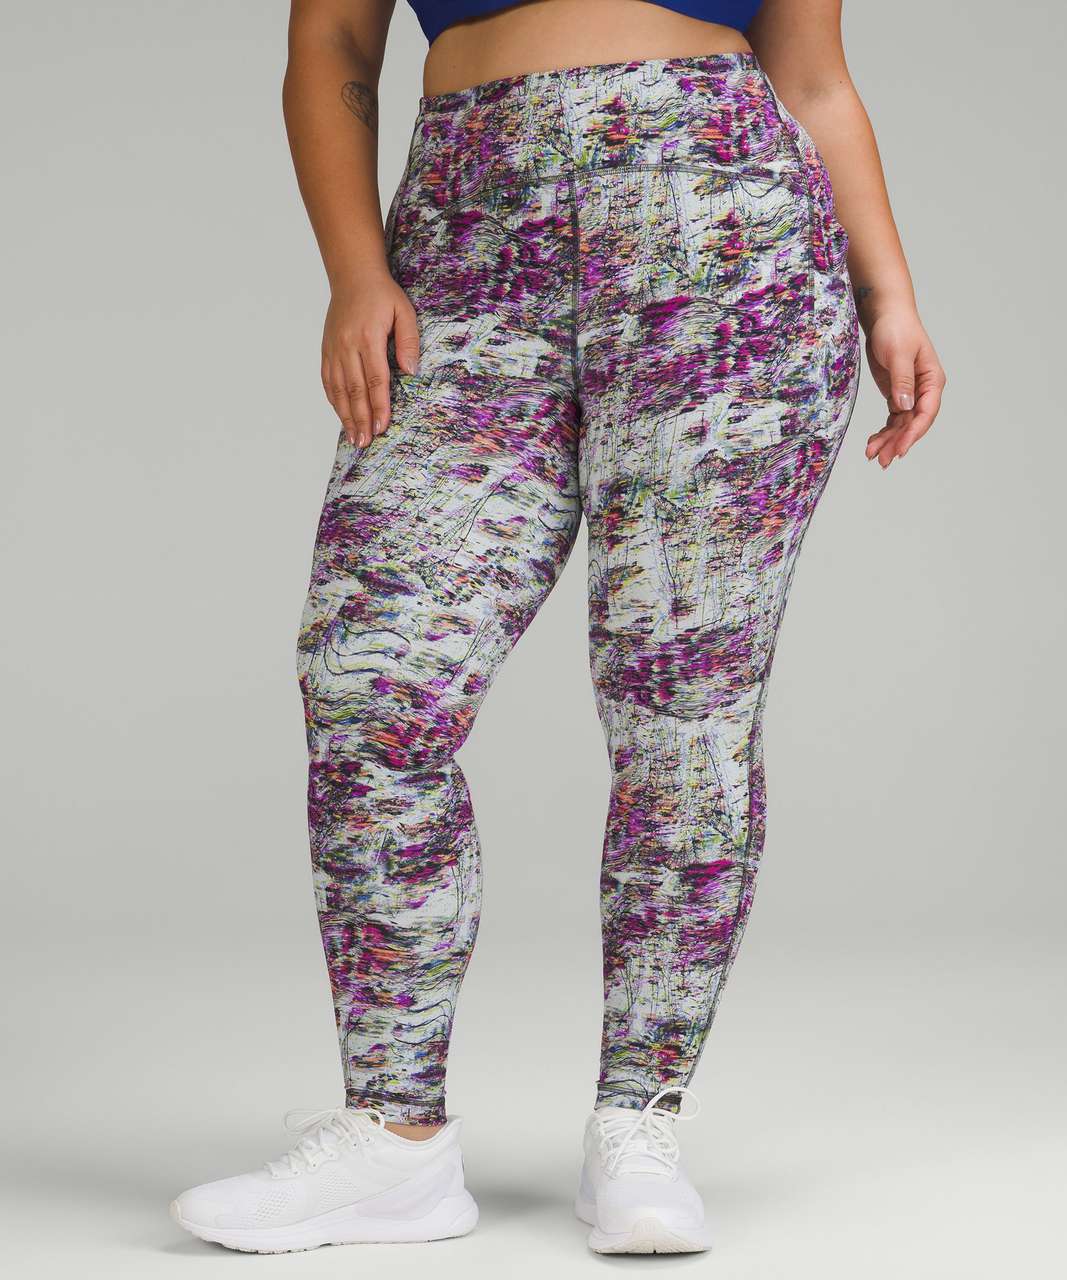 Lululemon Limited Edition Swift Speed High-Rise Tight 28" - Firework Floral Multi